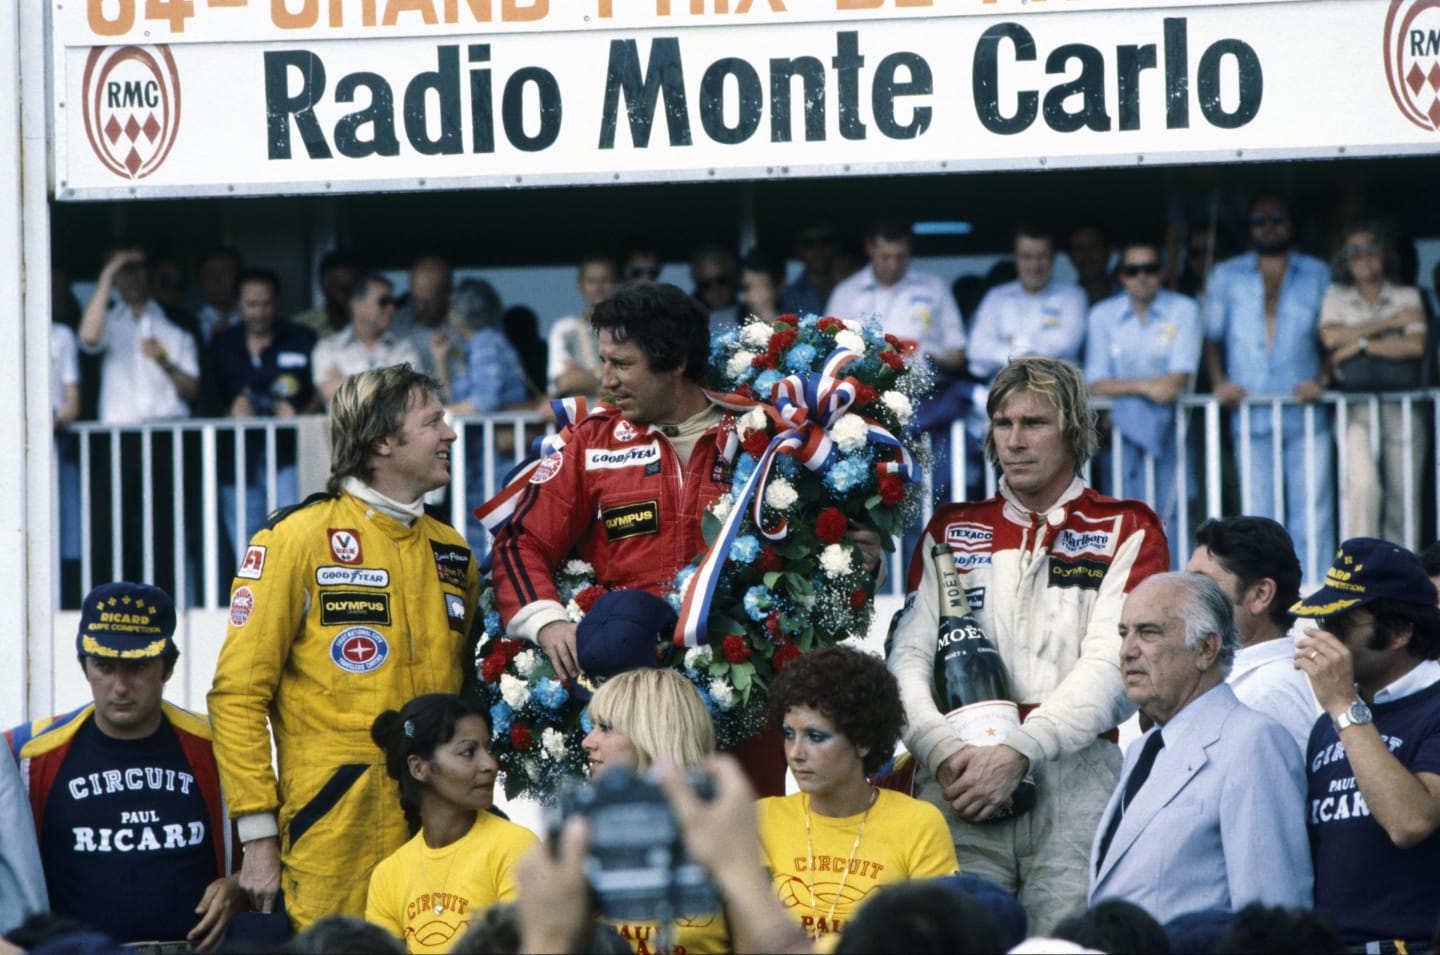 Paul Ricard, Le Castellet, France. 30th June -2nd July 1978.
Mario Andretti (Lotus 79-Ford) 1st